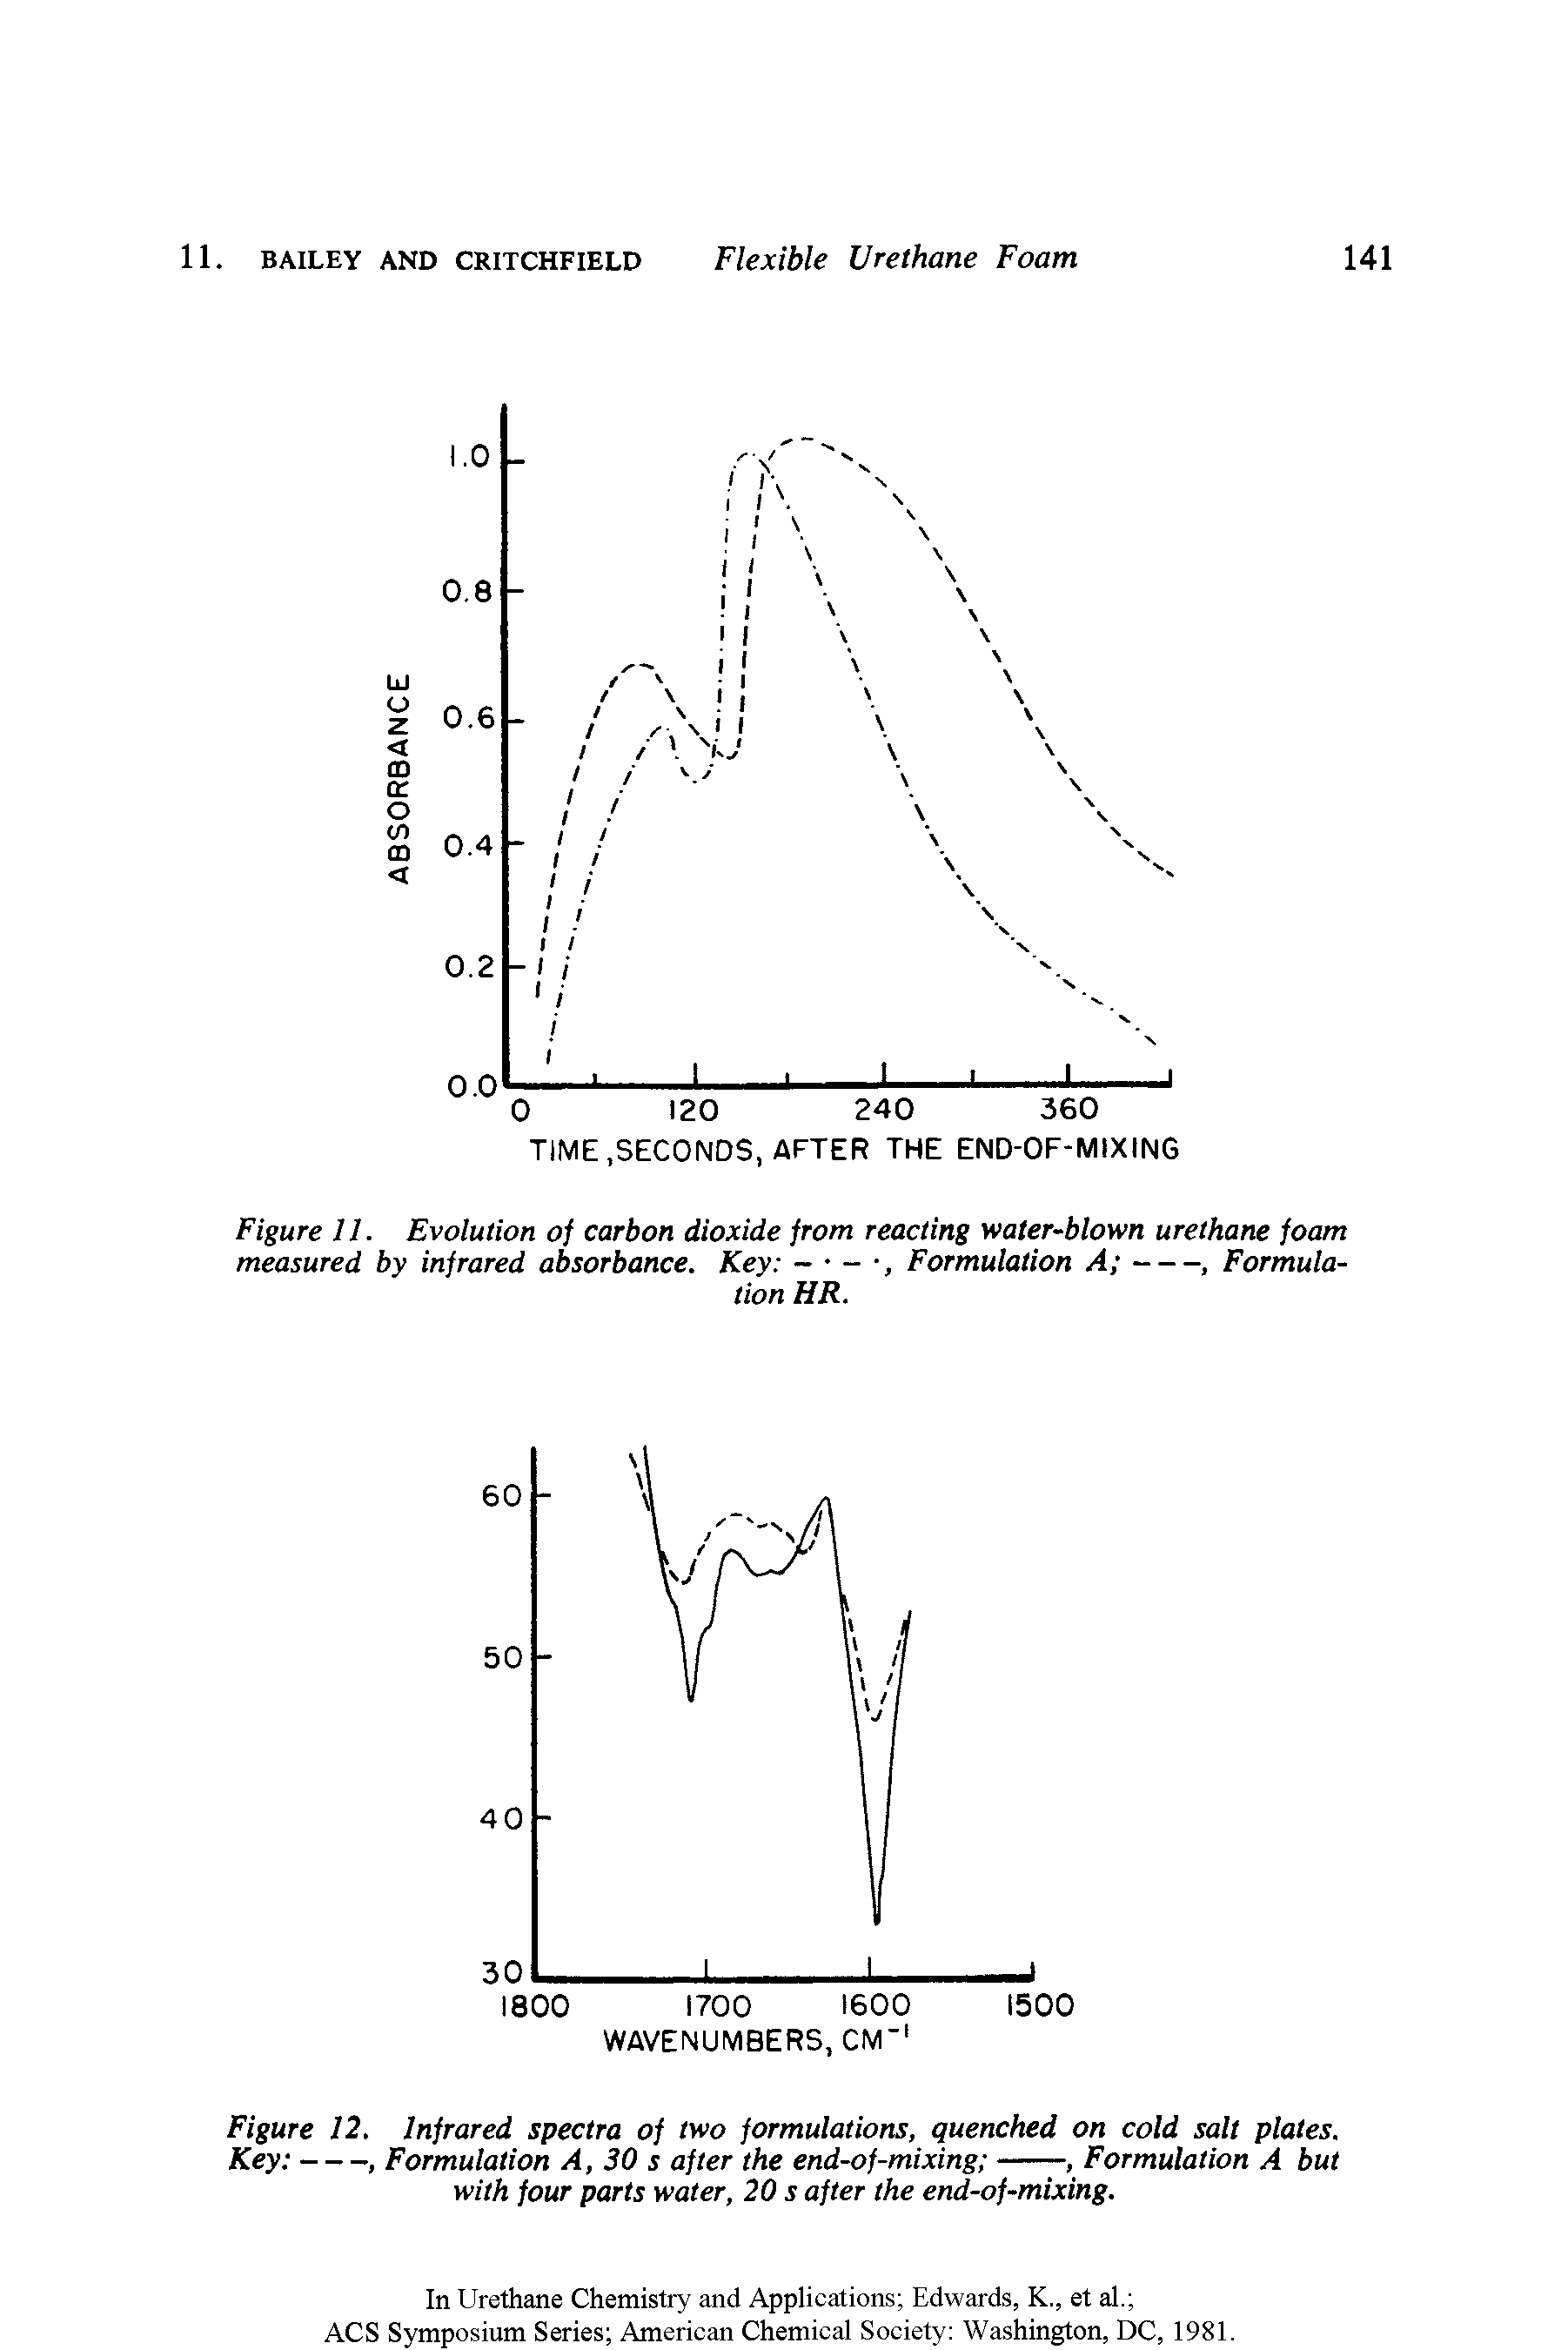 Figure 11. Evolution of carbon dioxide from reacting water-blown urethane foam measured by infrared absorbance. Key — — Formulation A ---------, Formula-...